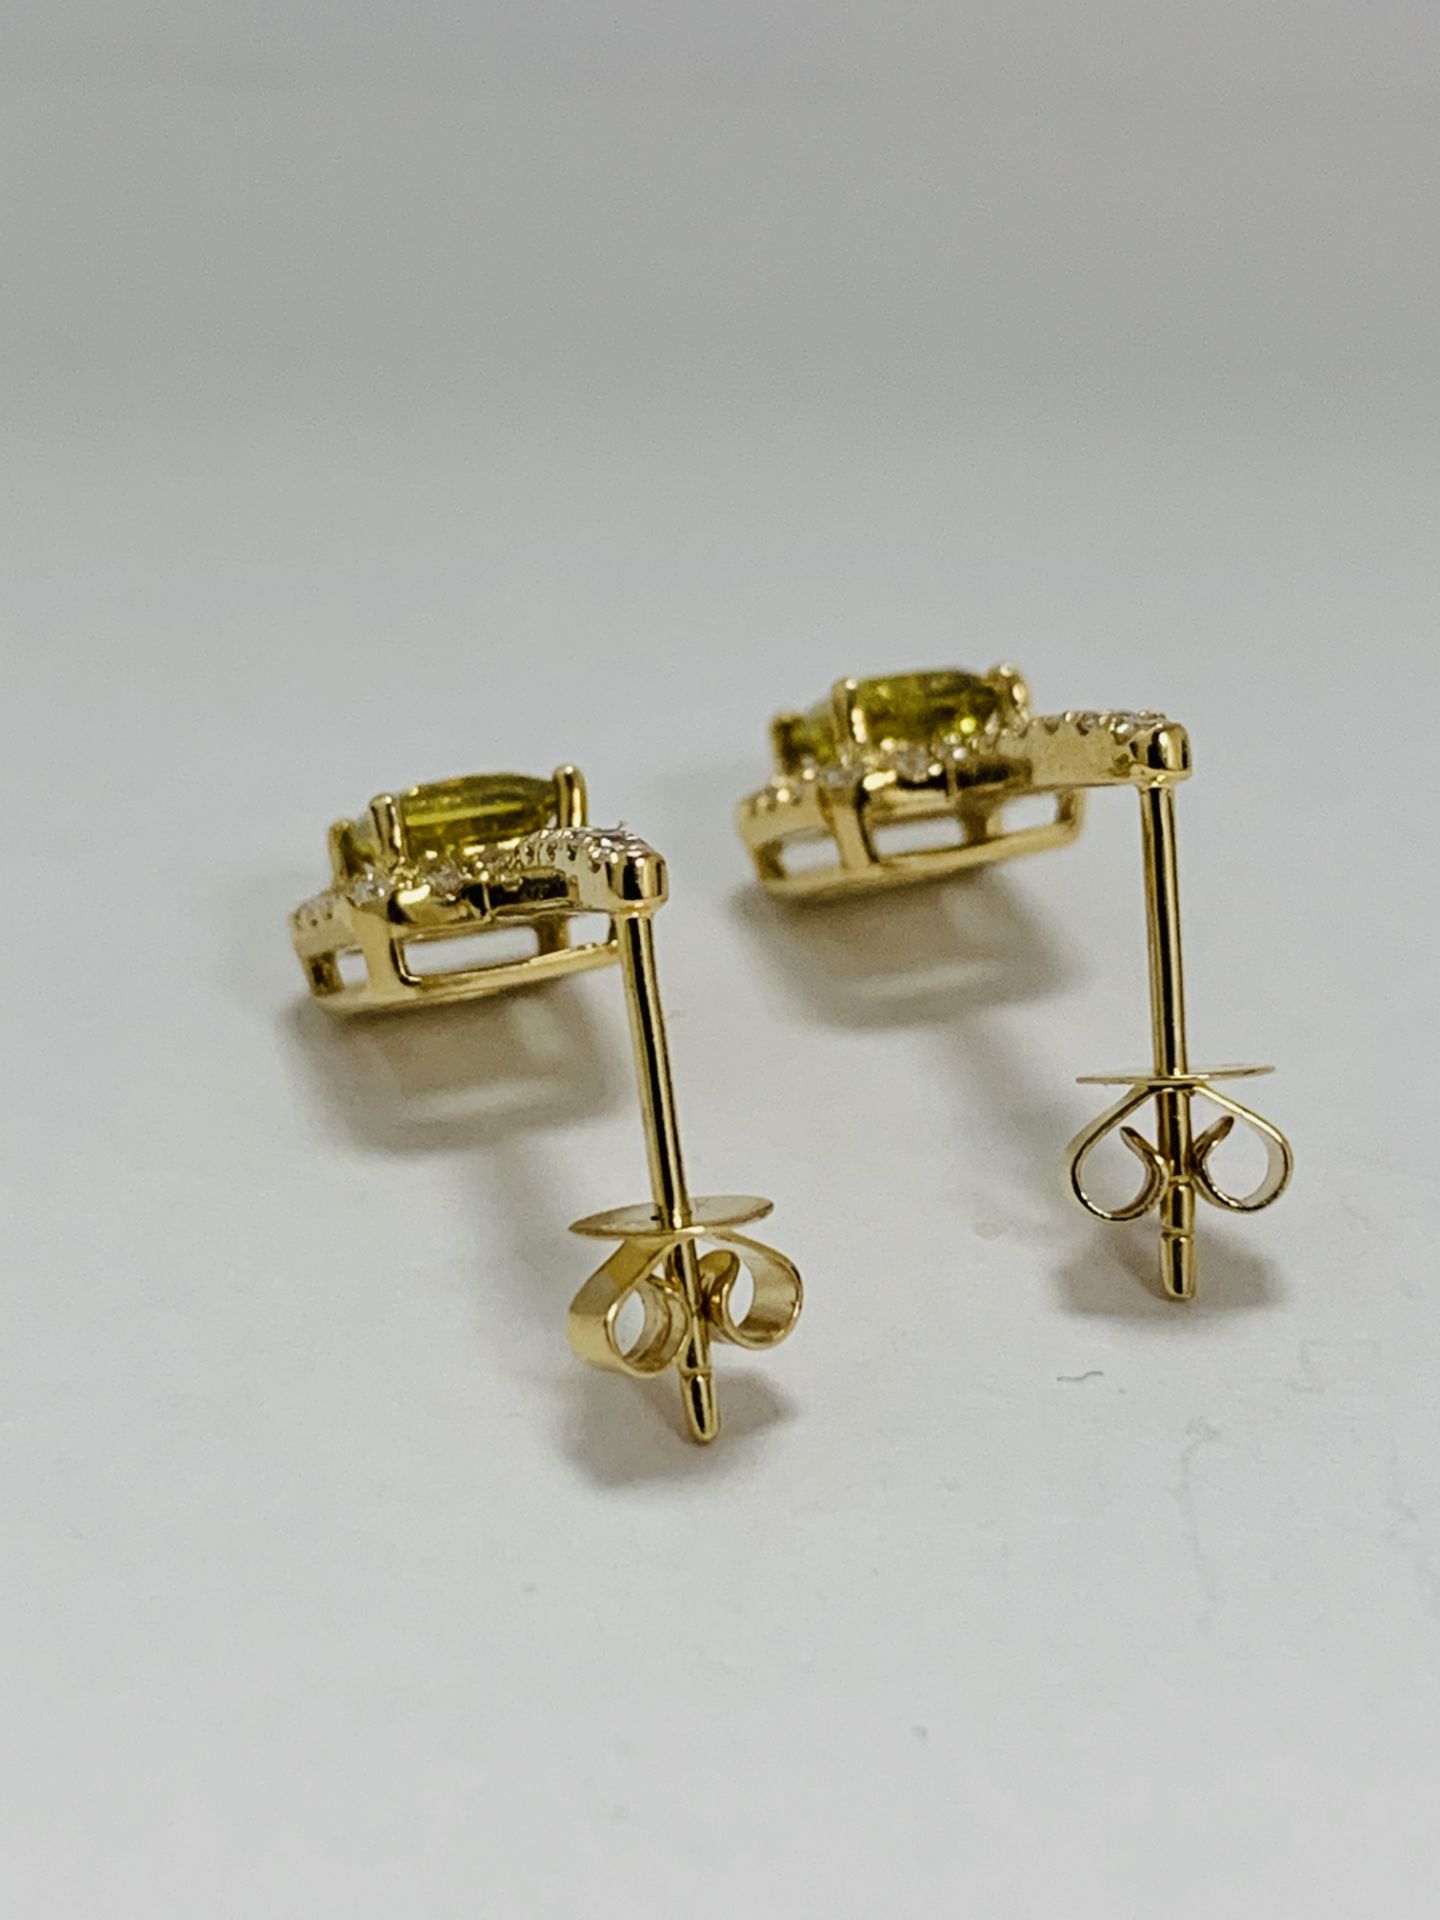 14K Yellow Gold Pair Of Earrings - Image 4 of 9